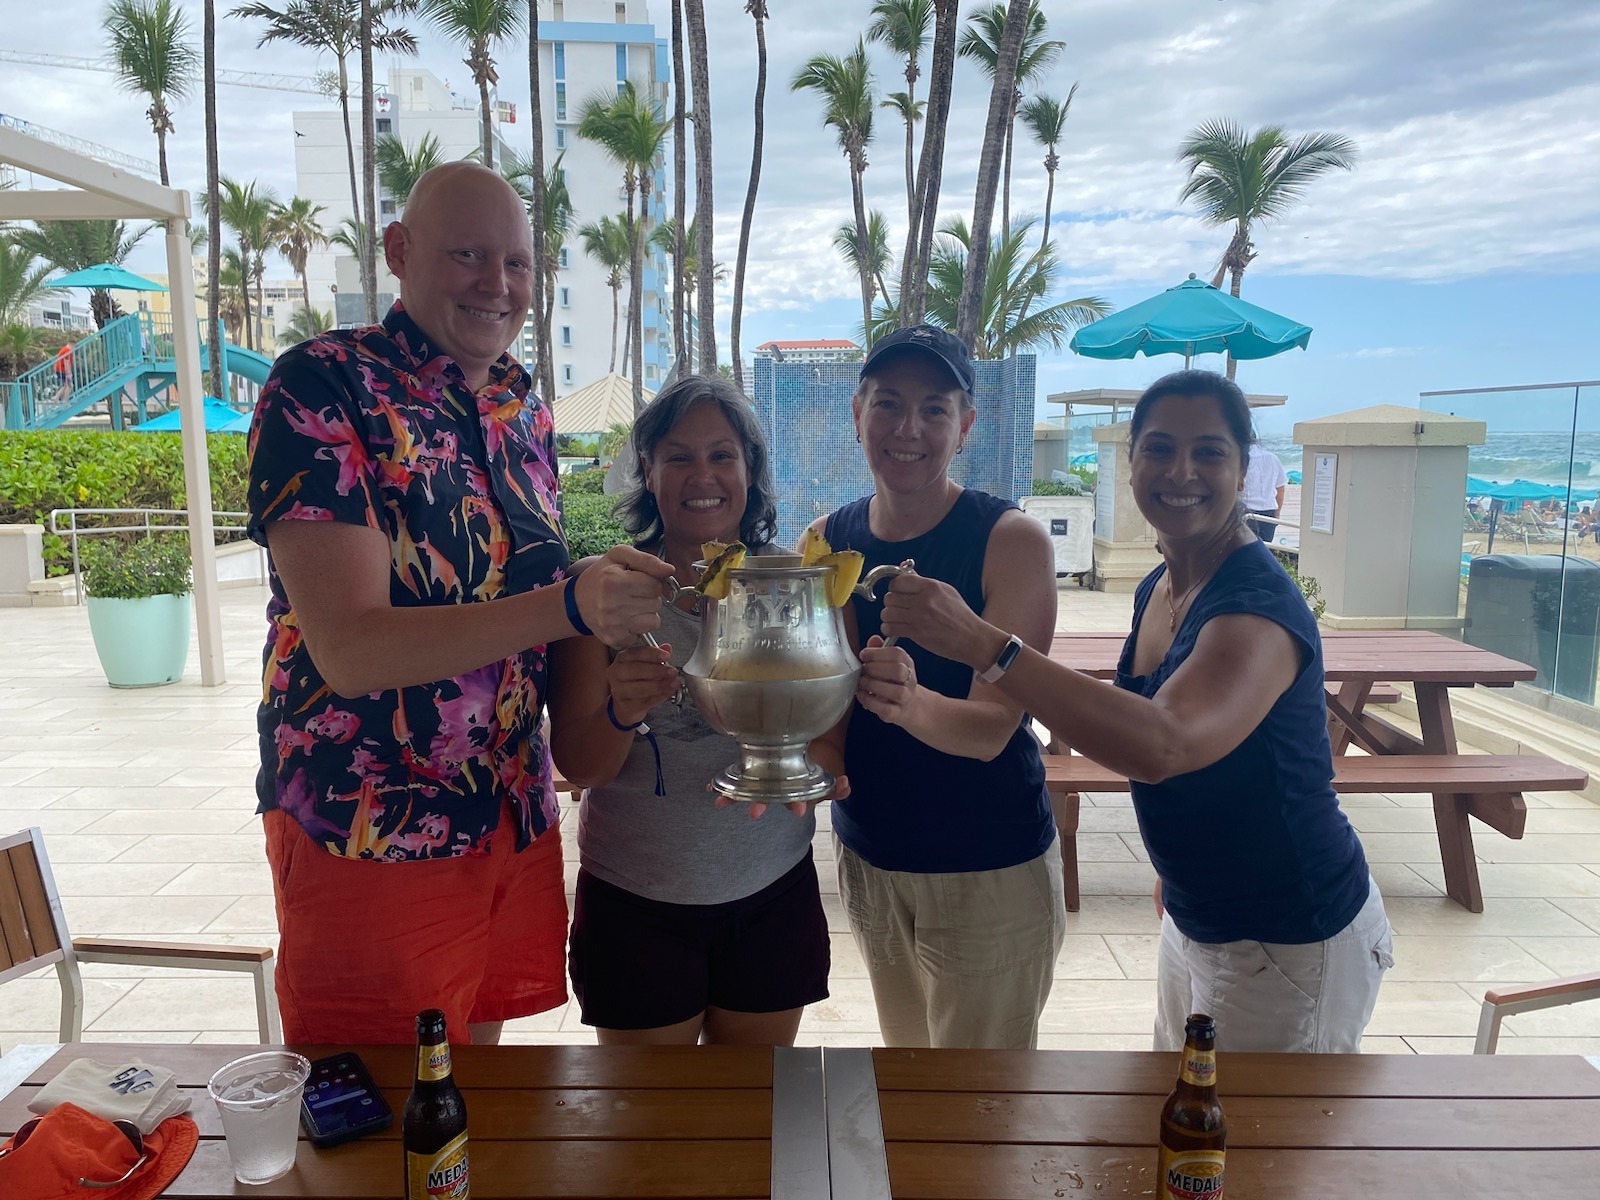 Four alums stand holding a Mory's cup with palm trees and a beach in the background